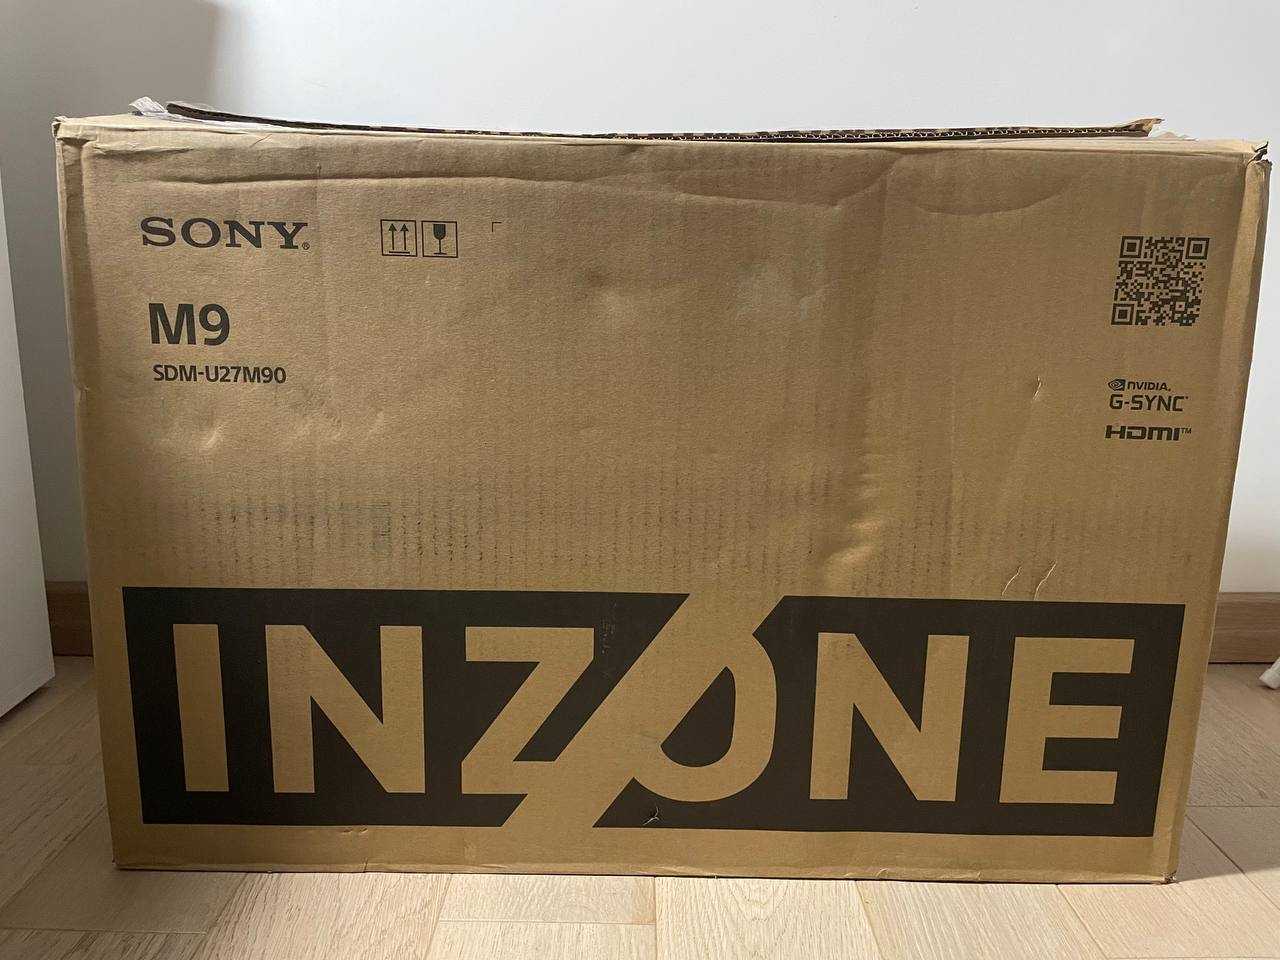 Sony Inzone M9 review: the best friend of the new consoles